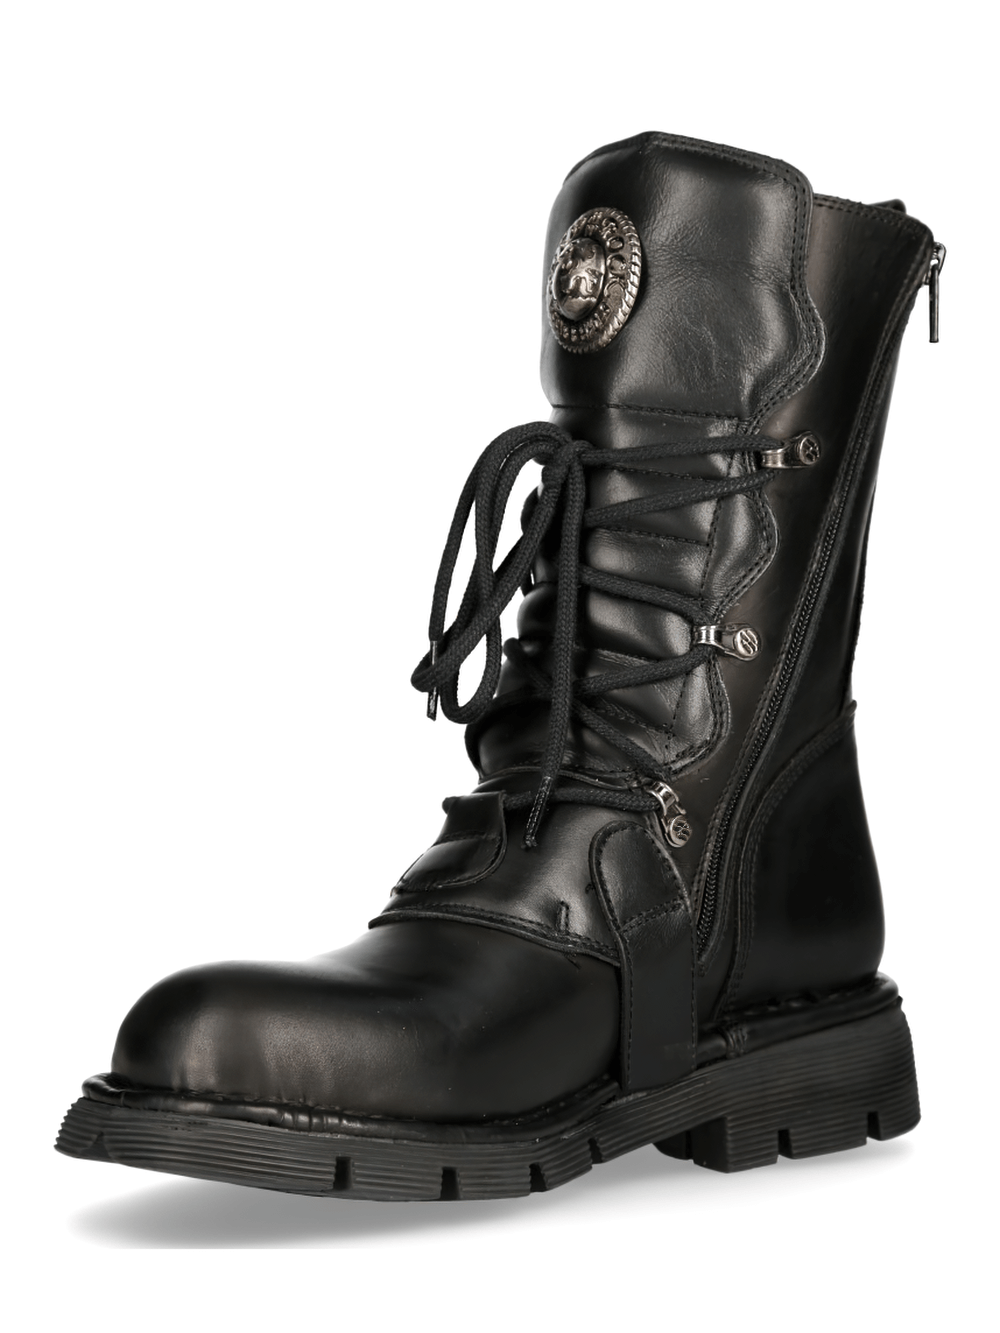 NEW ROCK Gothic Military Black Leather Combat Boots